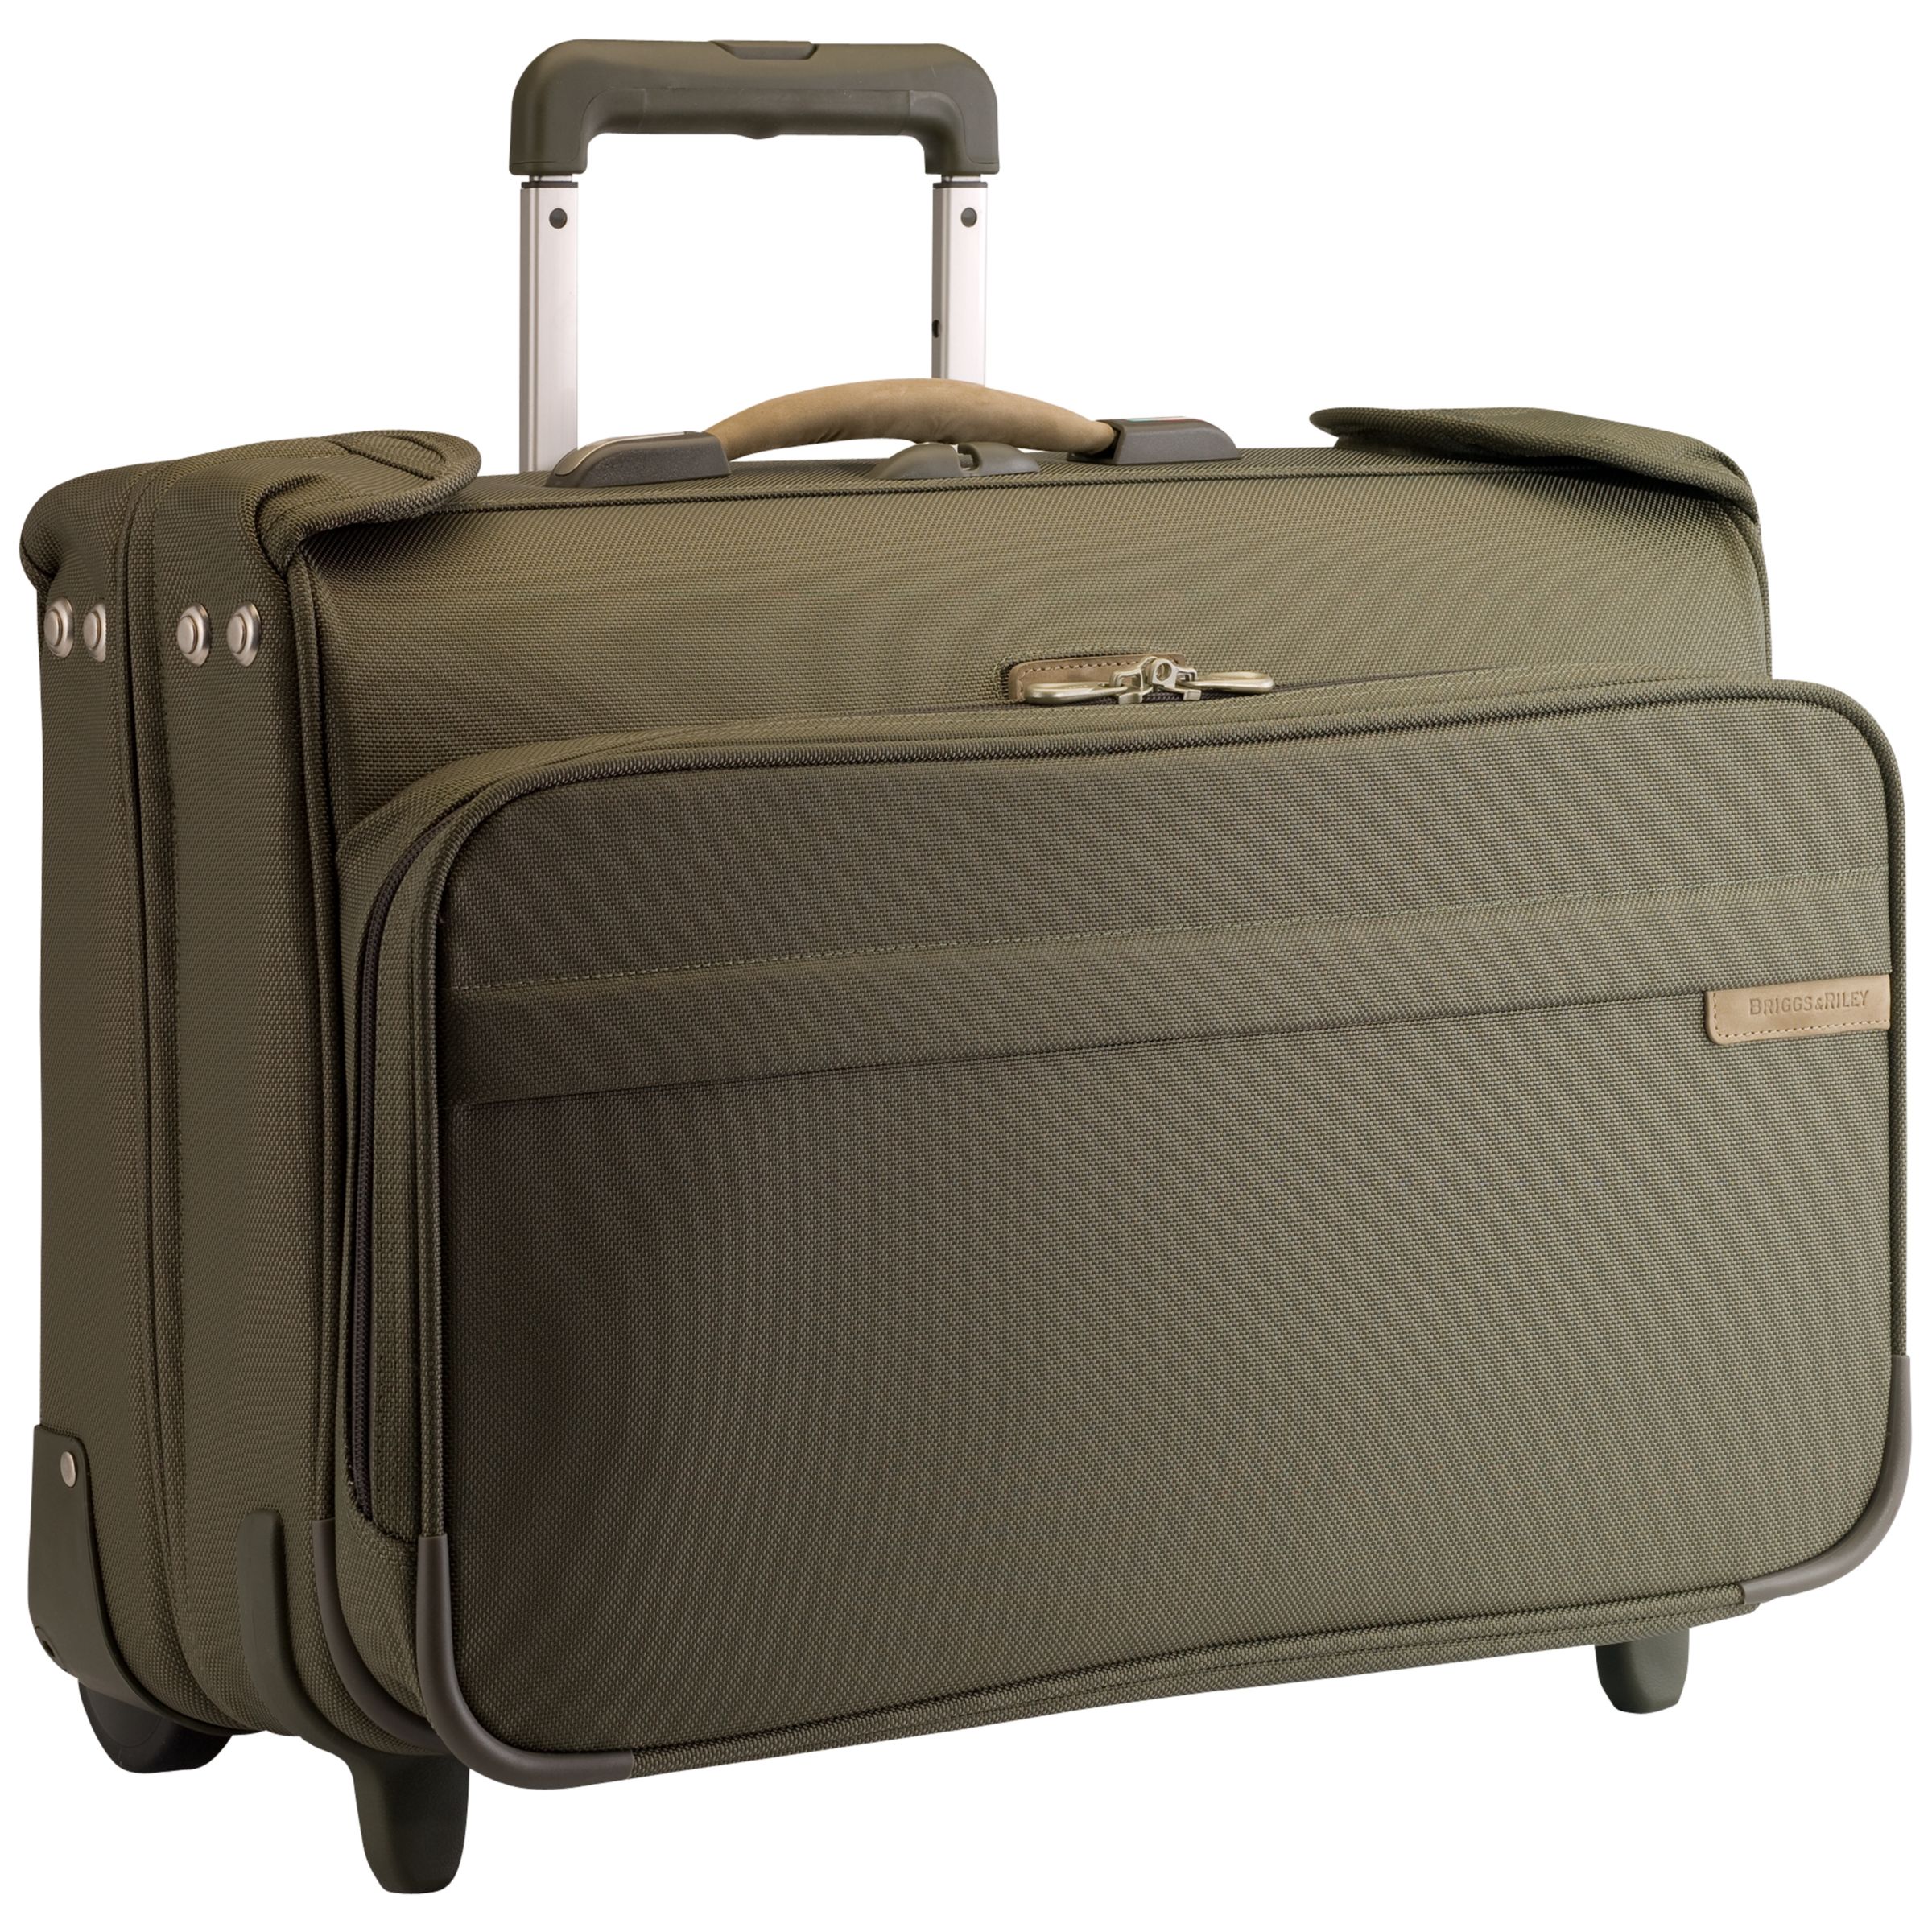 Biggs & Riley Wheeled Garment Carry On Bag, Olive at John Lewis